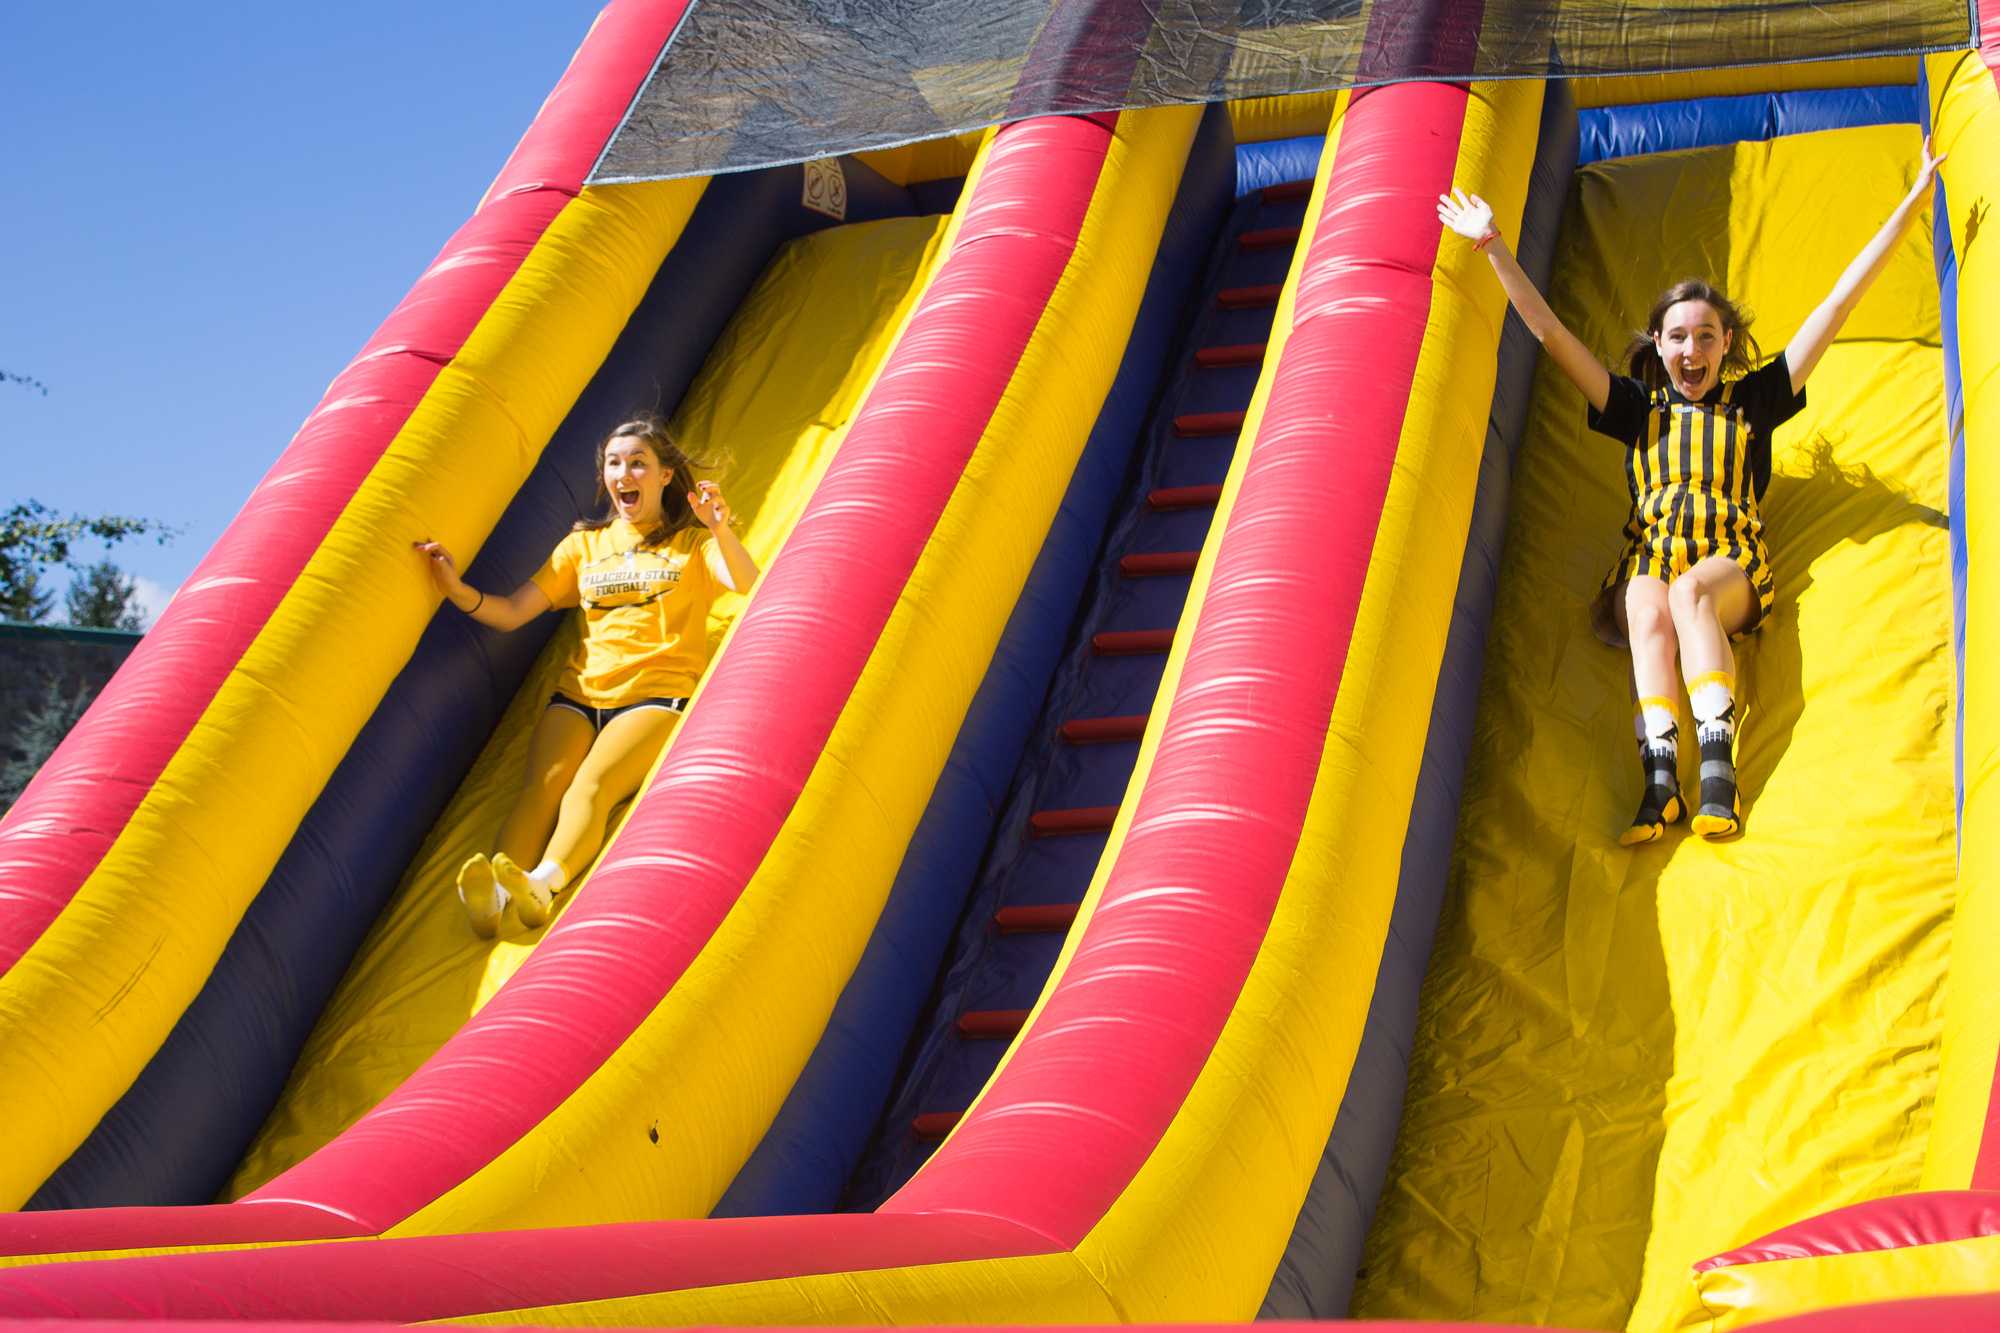 Freshman theater arts major Maddie Coggin (left) and freshman sustainable development major Devyn Barron (right) dress up to show their Mountaineer pride and enjoy the slides set up for Mountaineer Spirit Day on Oct. 19.